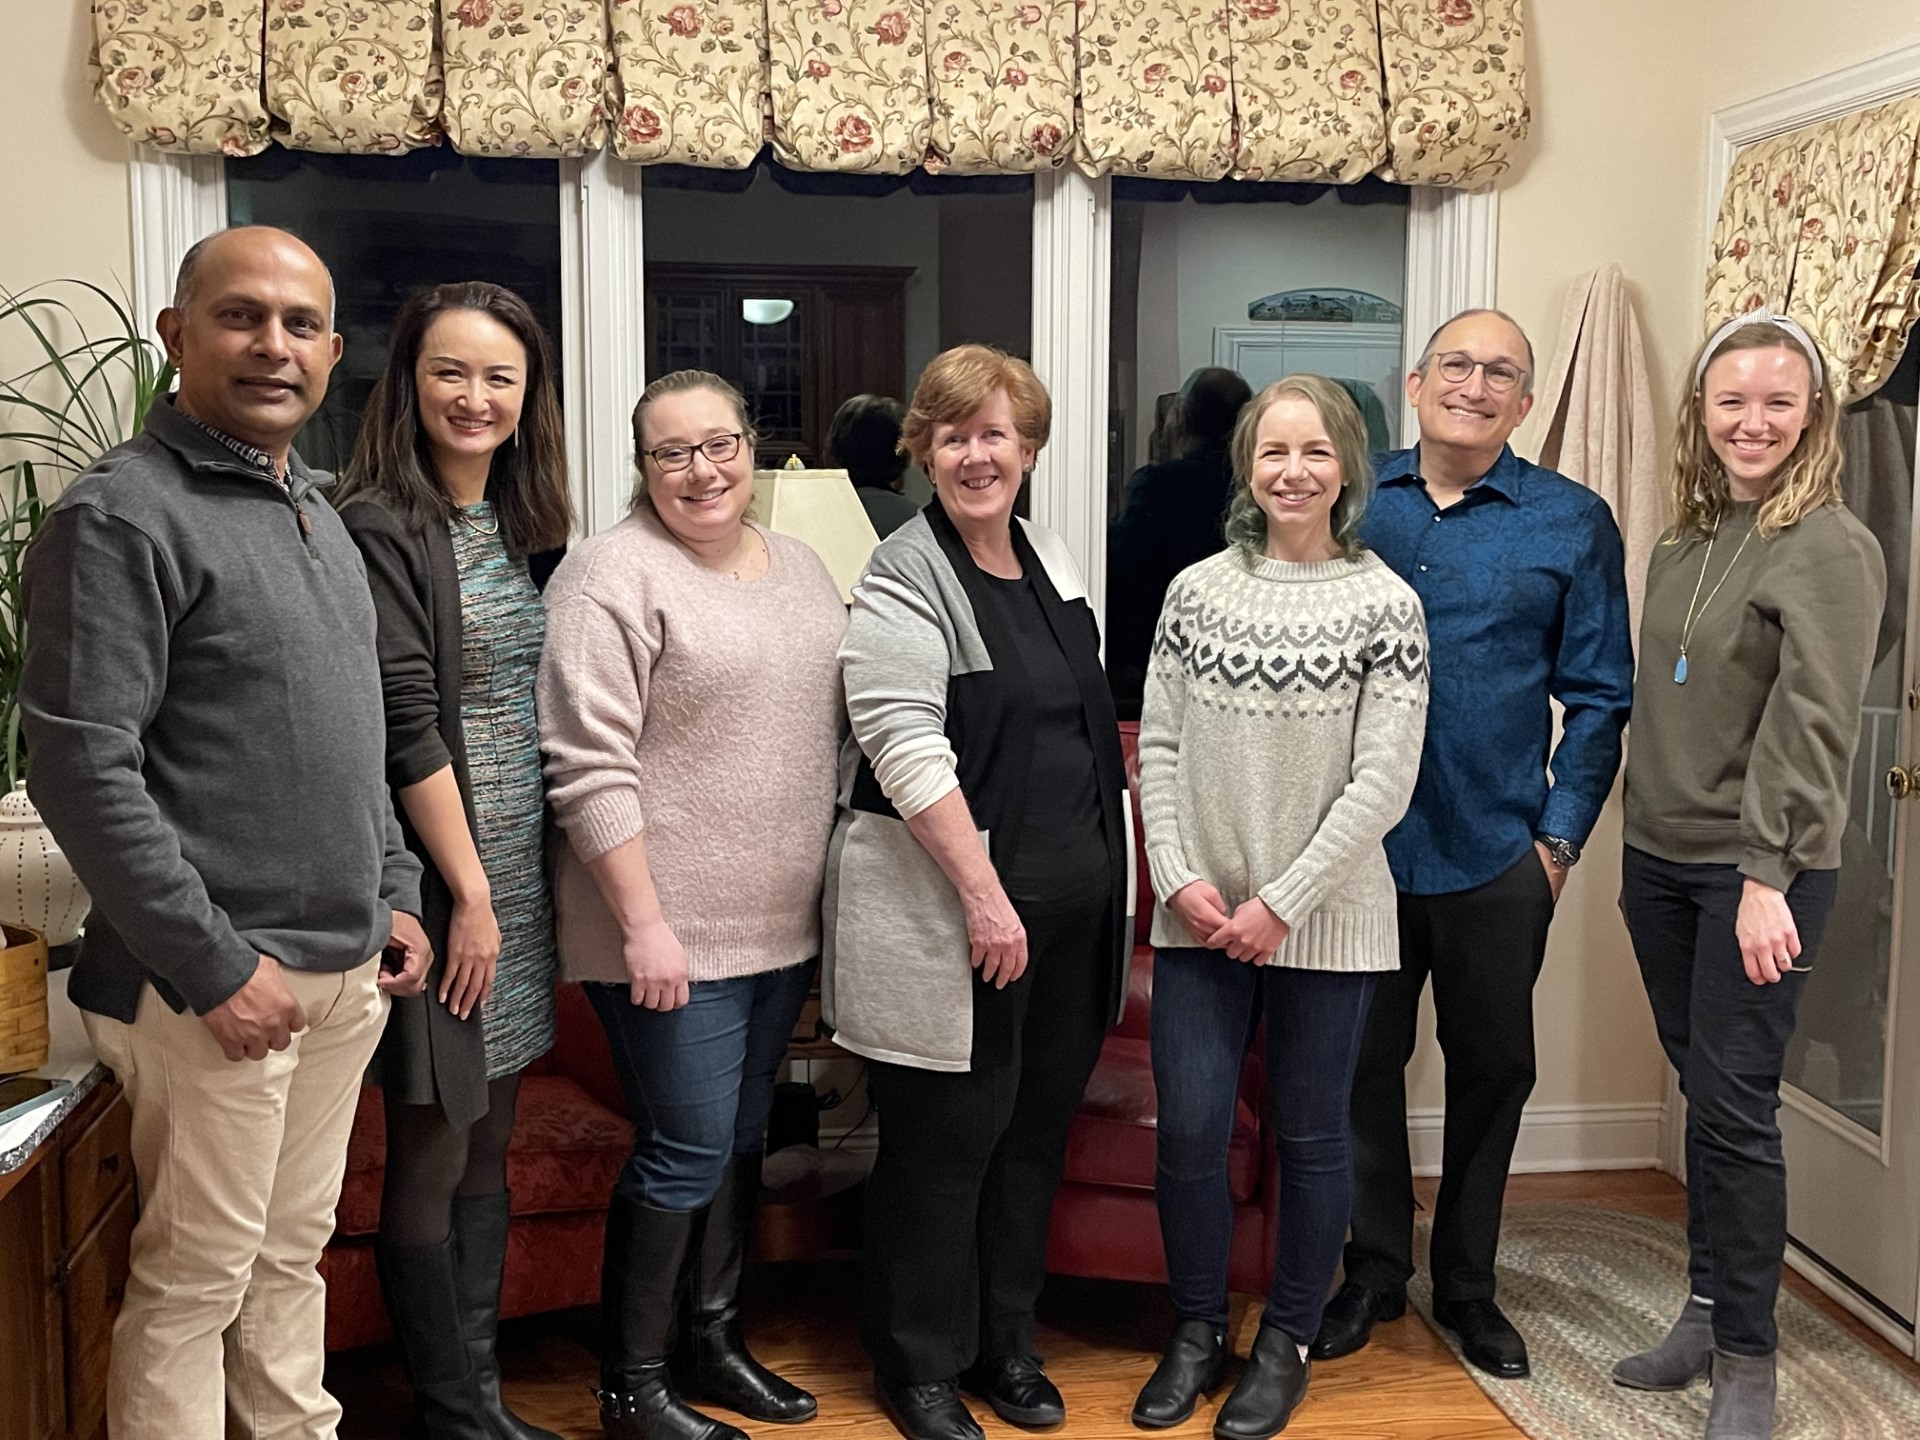 The HeardAI team includes scholars, students, and community members representing diverse backgrounds, including (from left): Nihar Mahapatra, Jia Bin, Caryn Herring, Anne Marie Ryan, Megan Arney (project manager), J. Scott Yaruss, and Hope Gerlach-Houck.